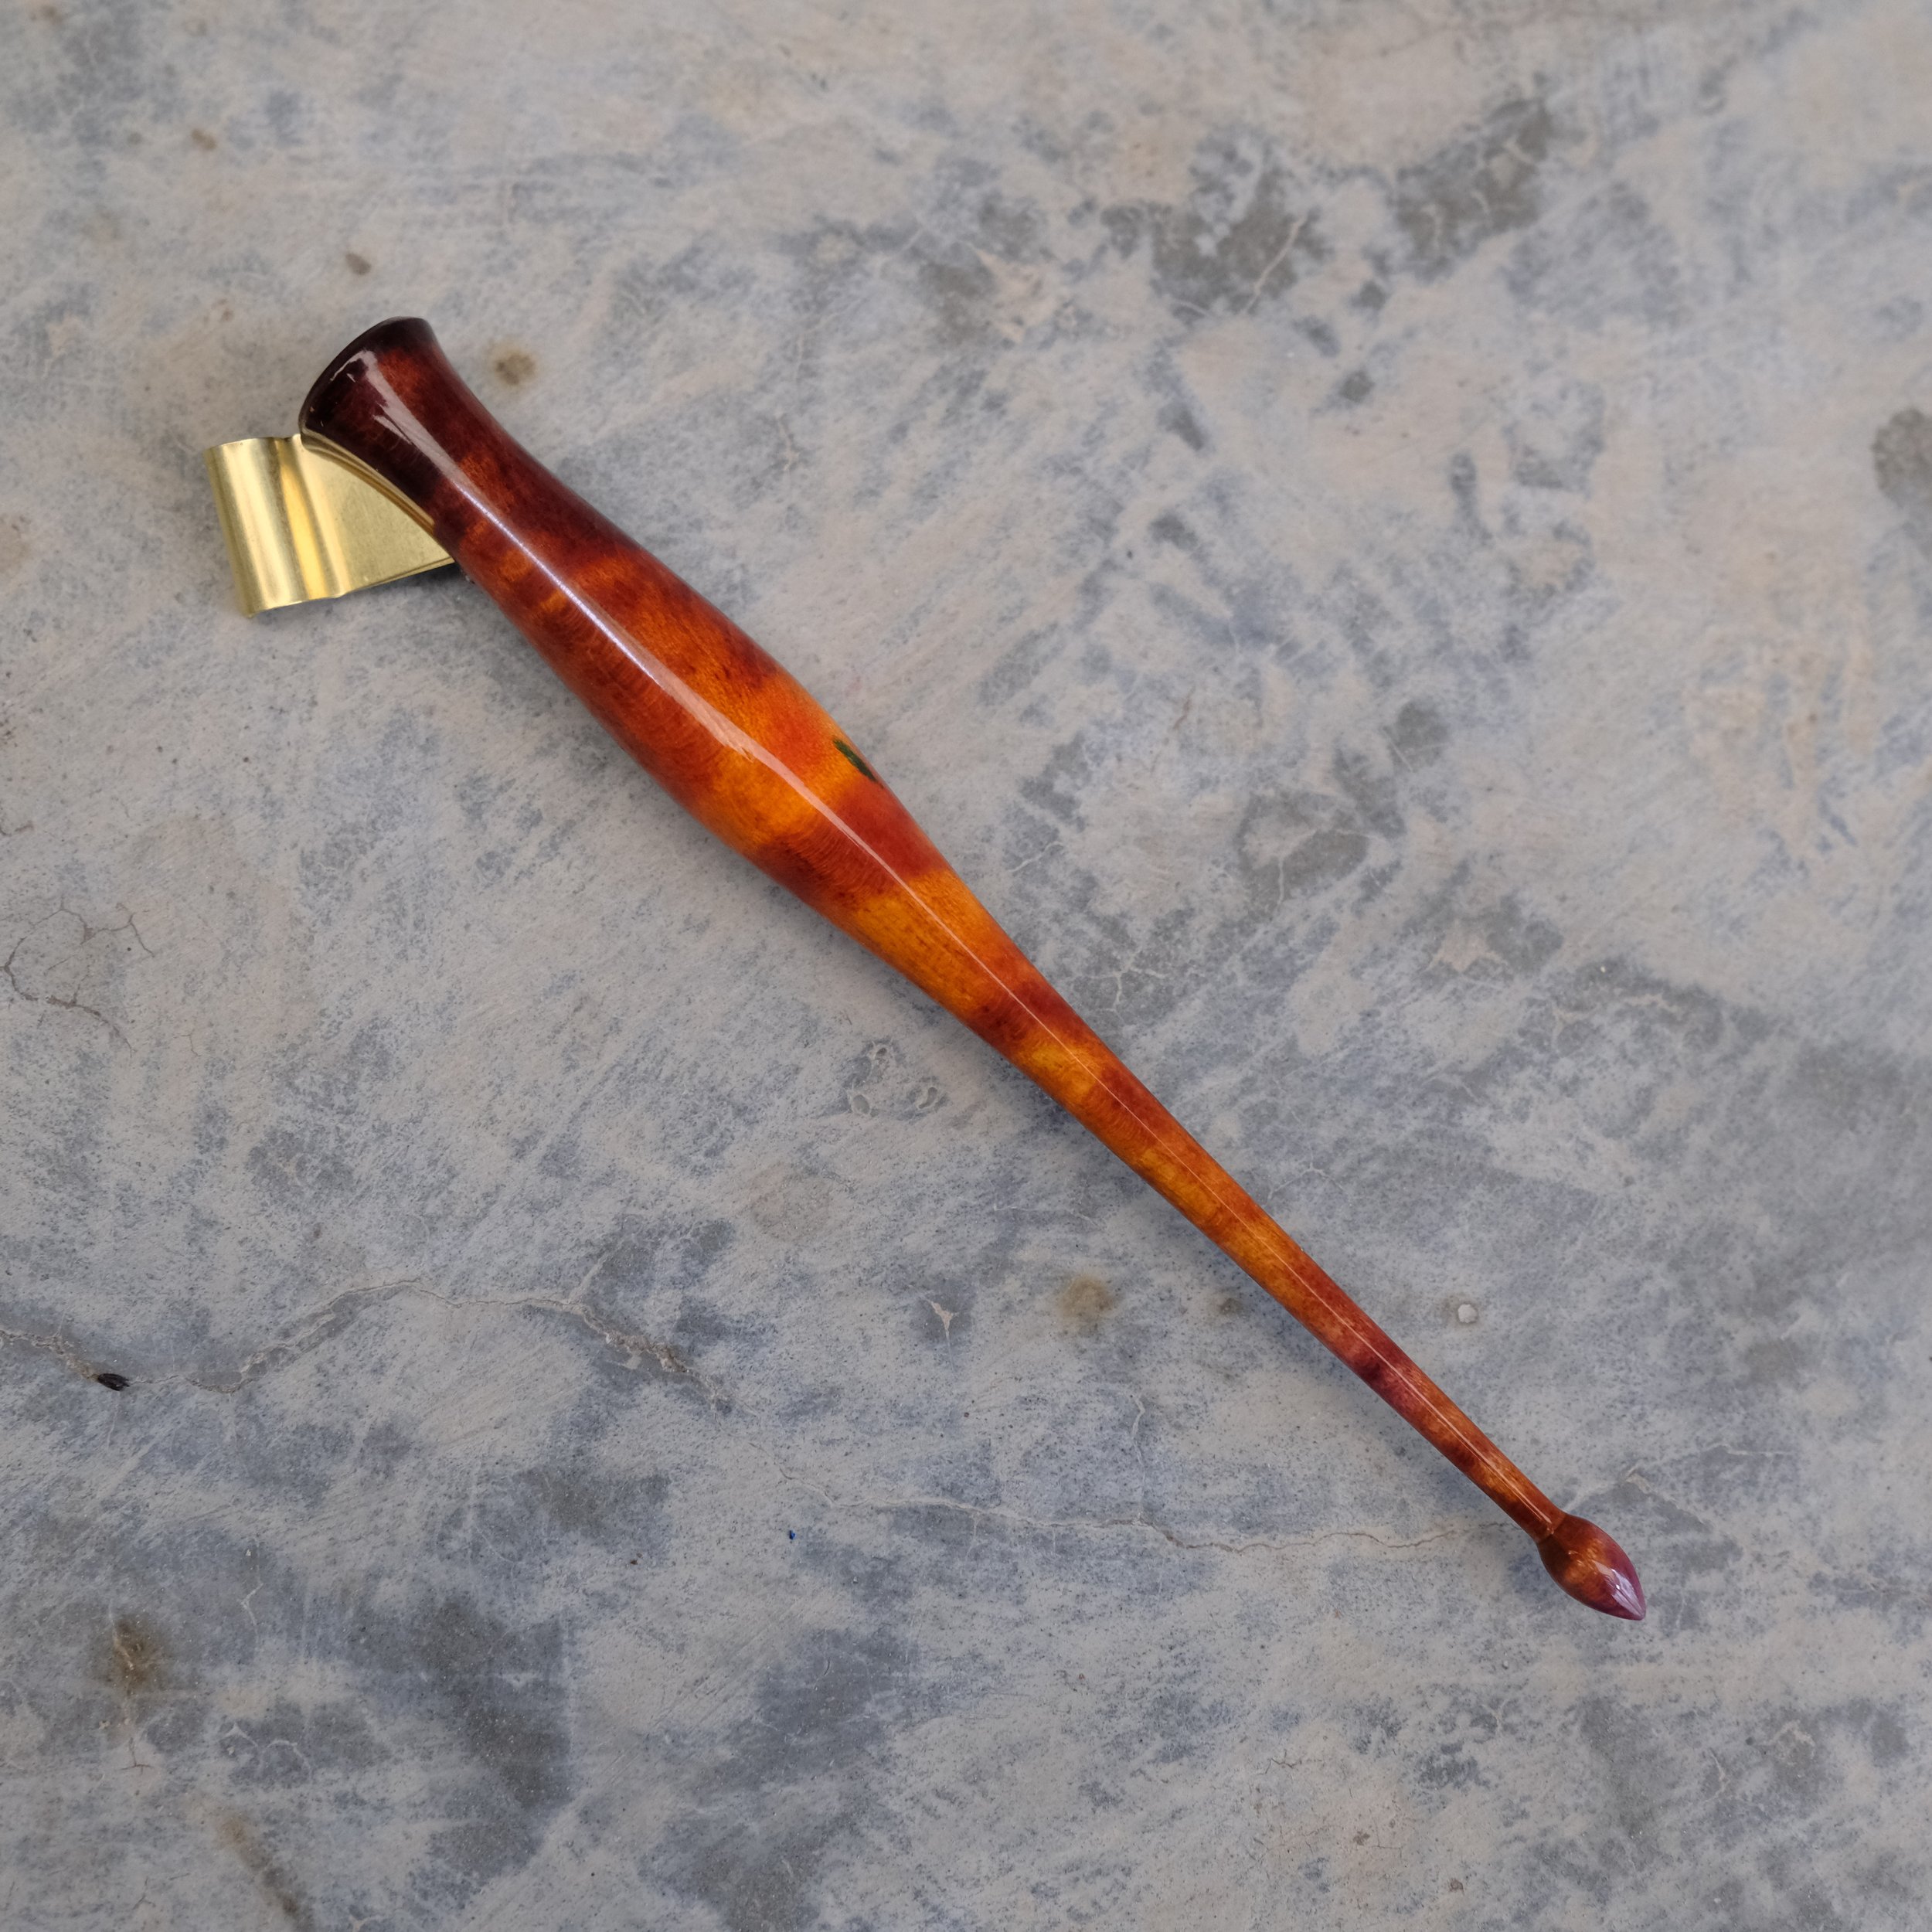 bright-flame-hot-summer-dyed-curly-maple-oblique-pen-holder.jpeg